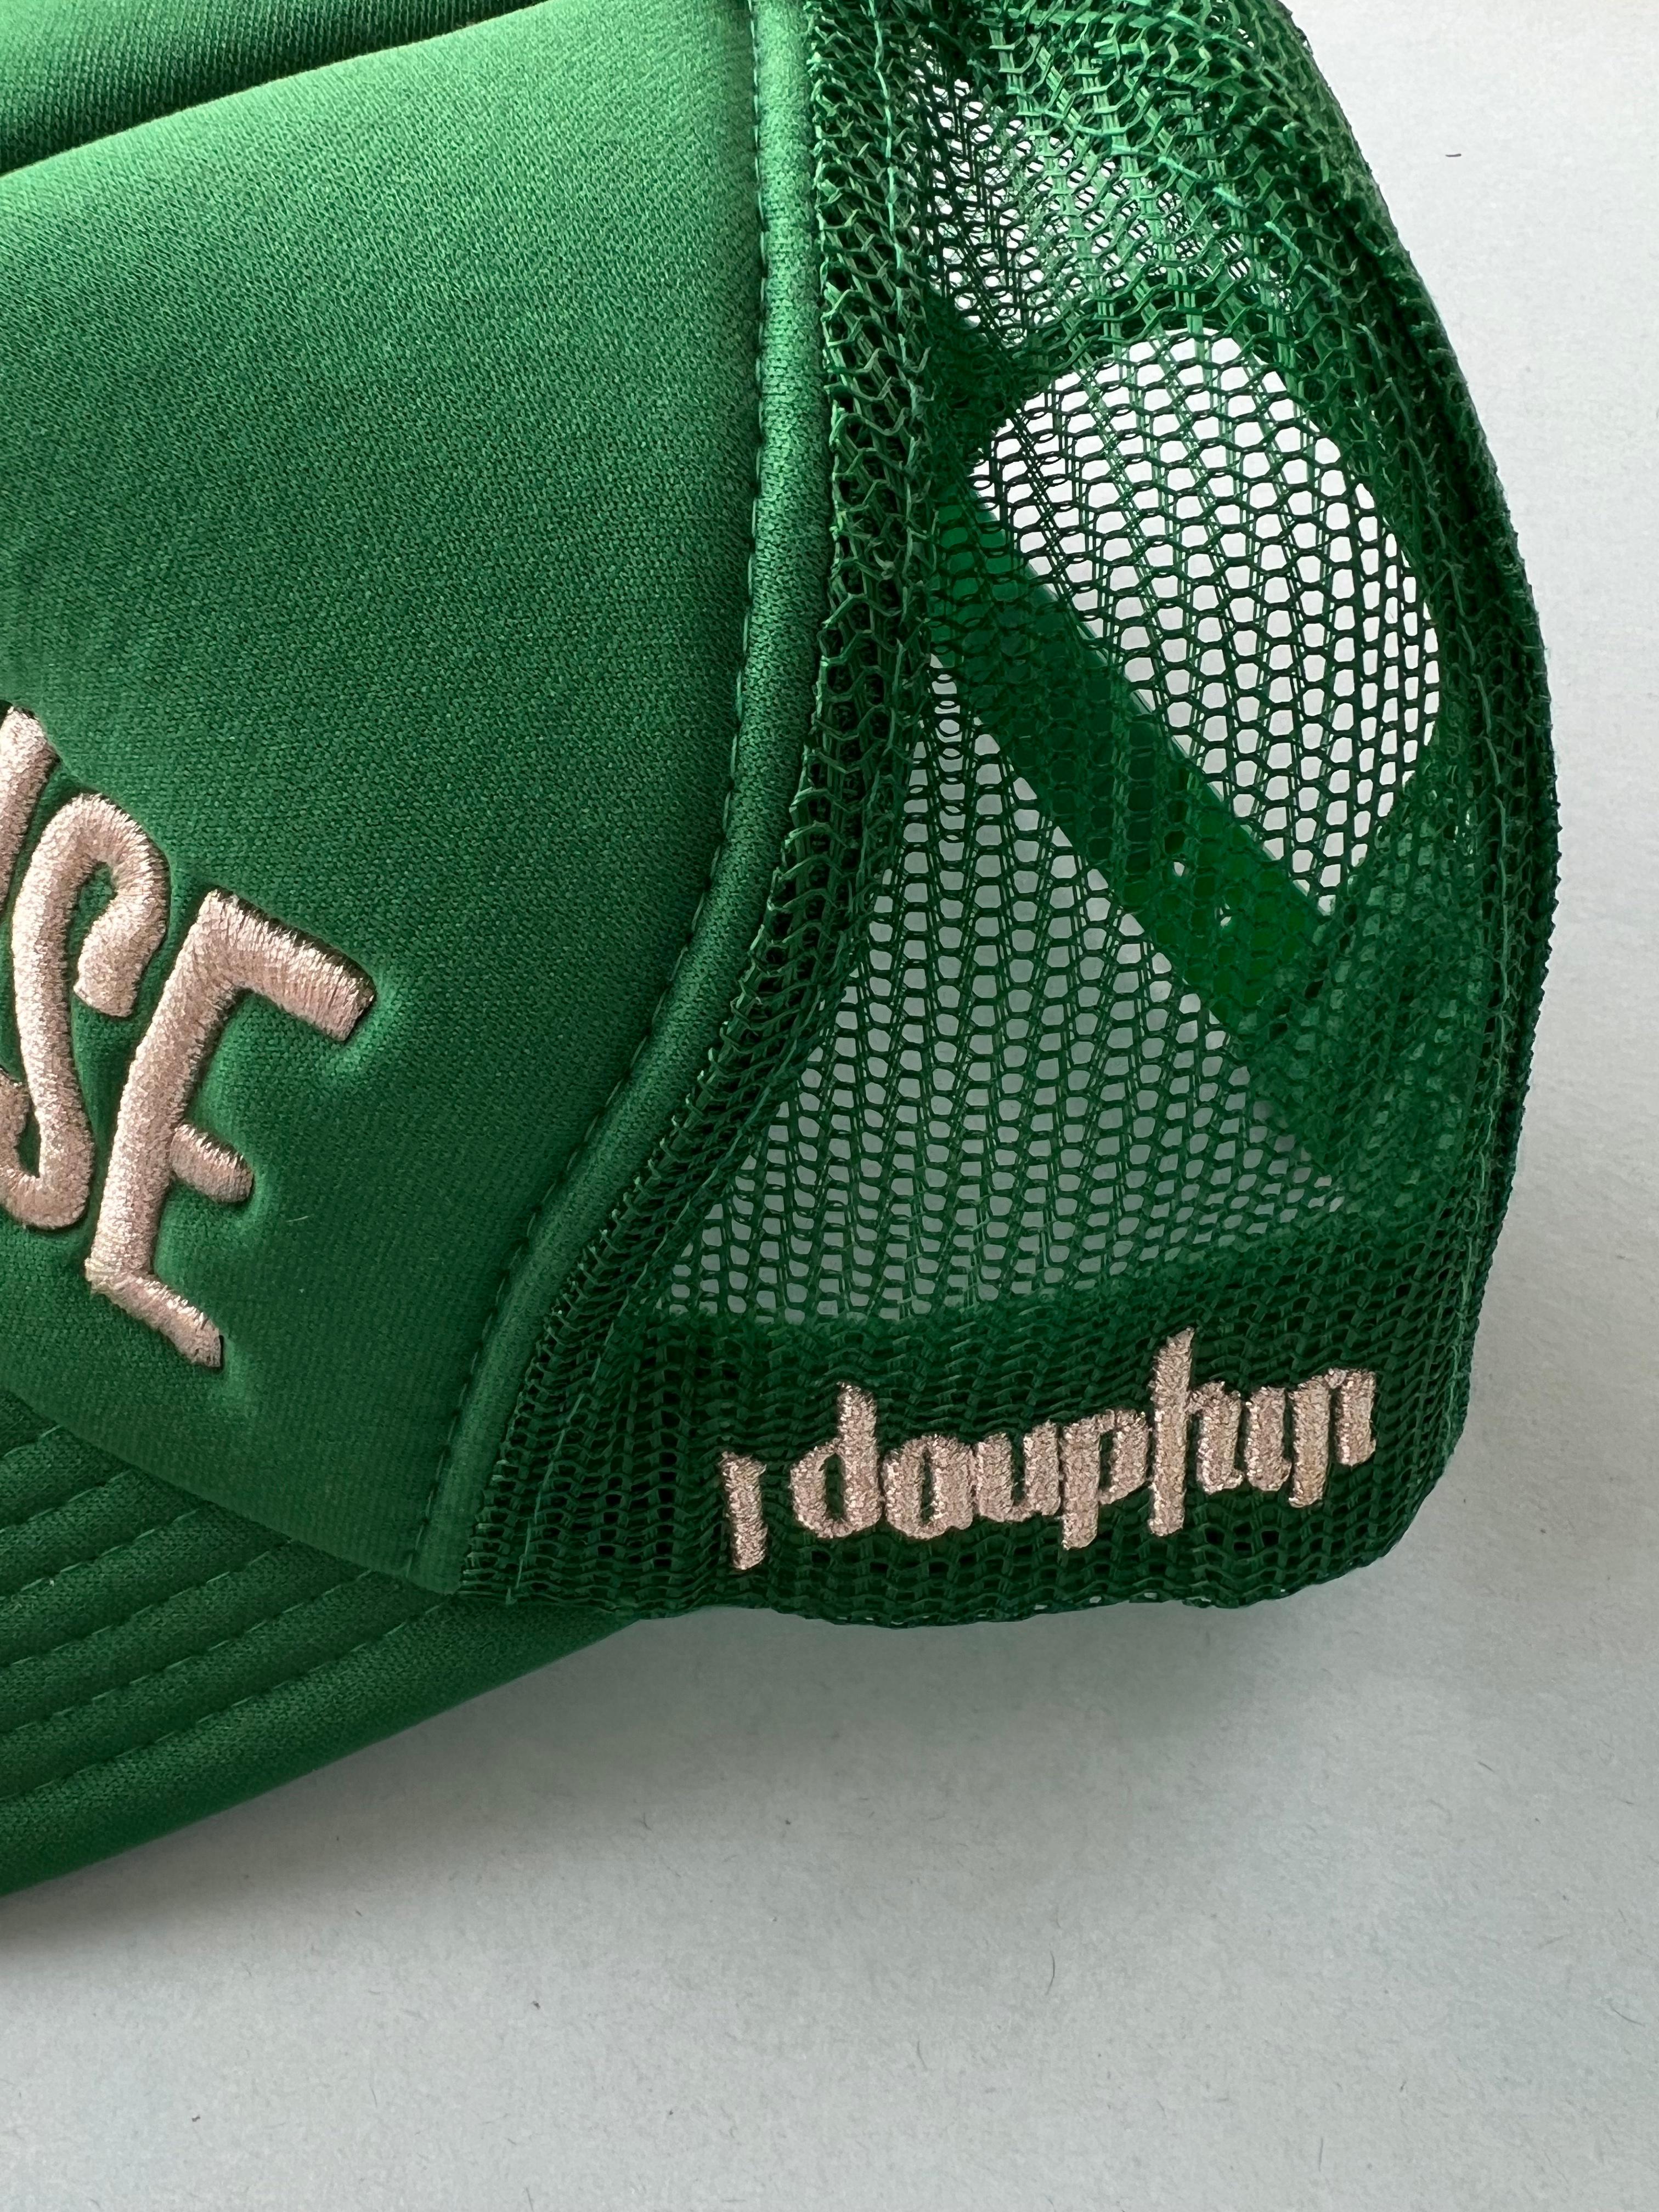 Brand: J Dauphin
Hat Green Trucker Paradise Silver Embroidery J Dauphin

Embroidery Made in LA

Express a hybrid of easy-luxe and bourgeoisie jet-set look. Effortless and versatile, elegant and classy they bring an allure of unexpected